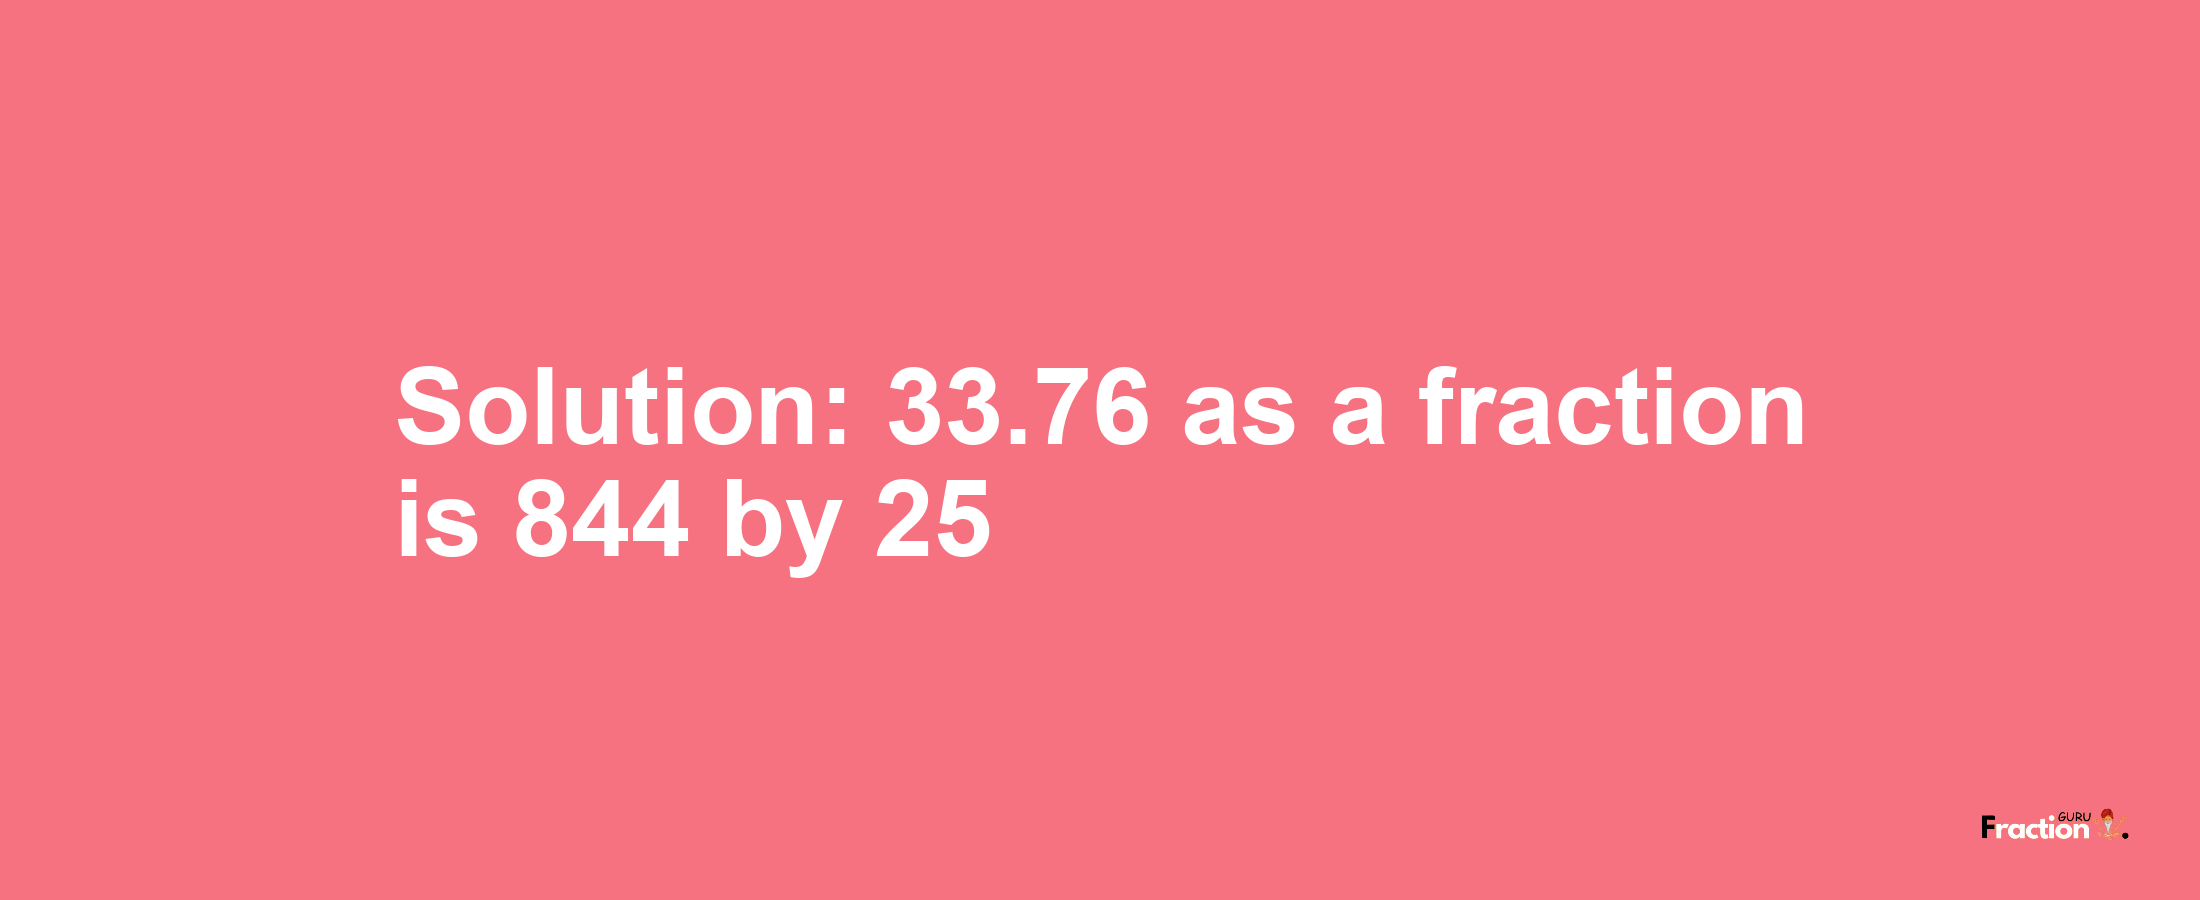 Solution:33.76 as a fraction is 844/25